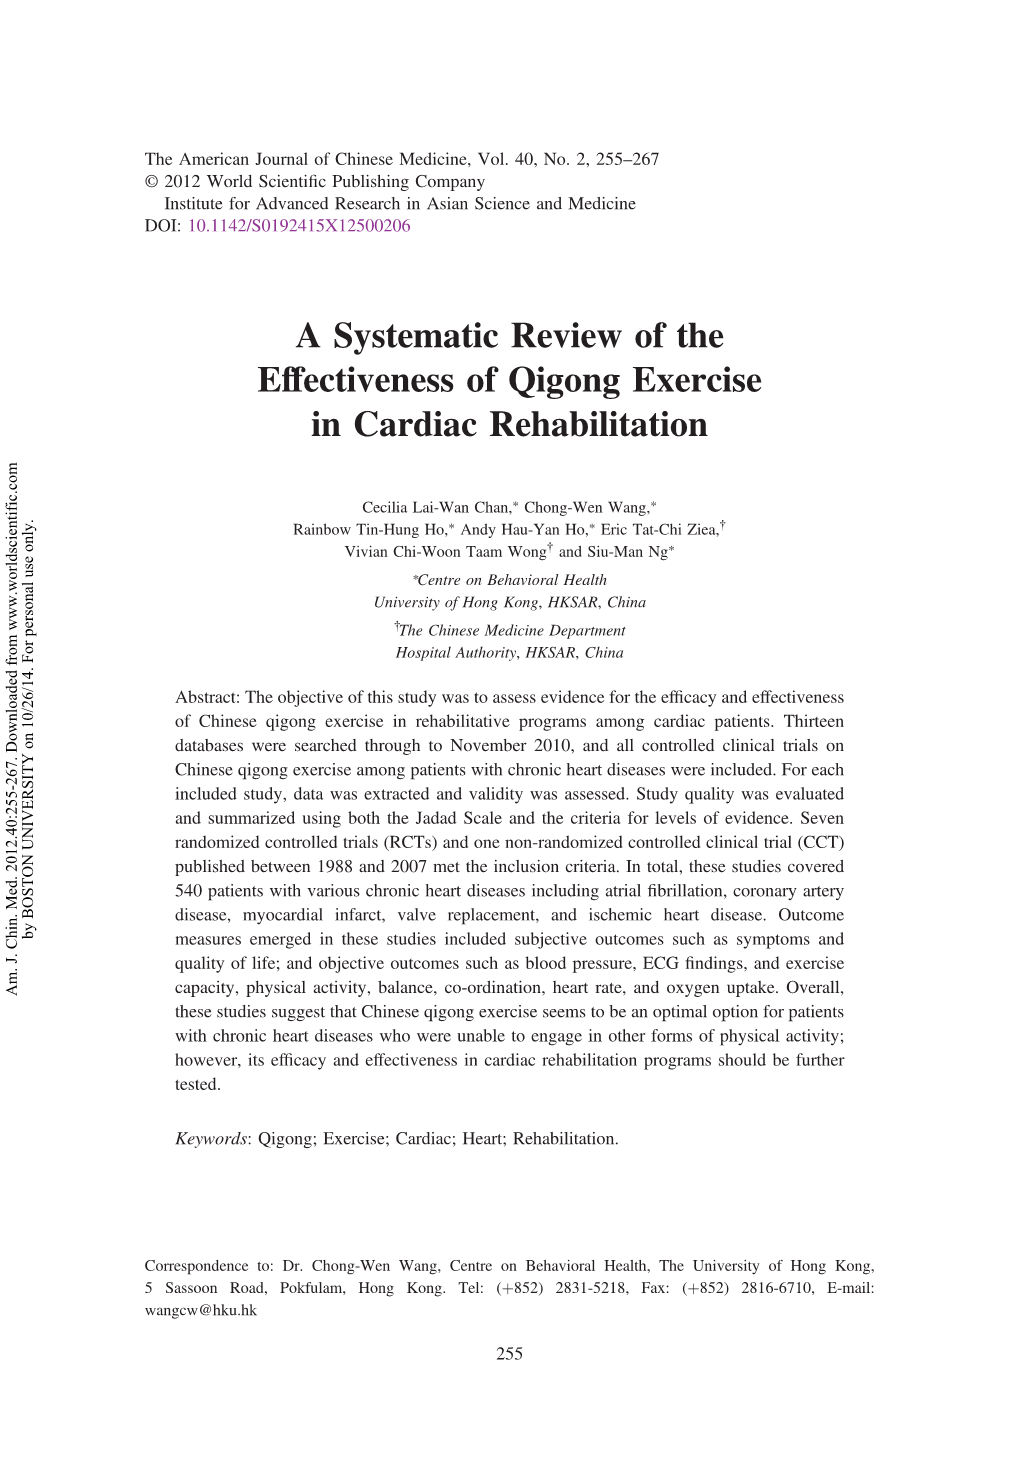 A Systematic Review of the Effectiveness of Qigong Exercise in Cardiac Rehabilitation